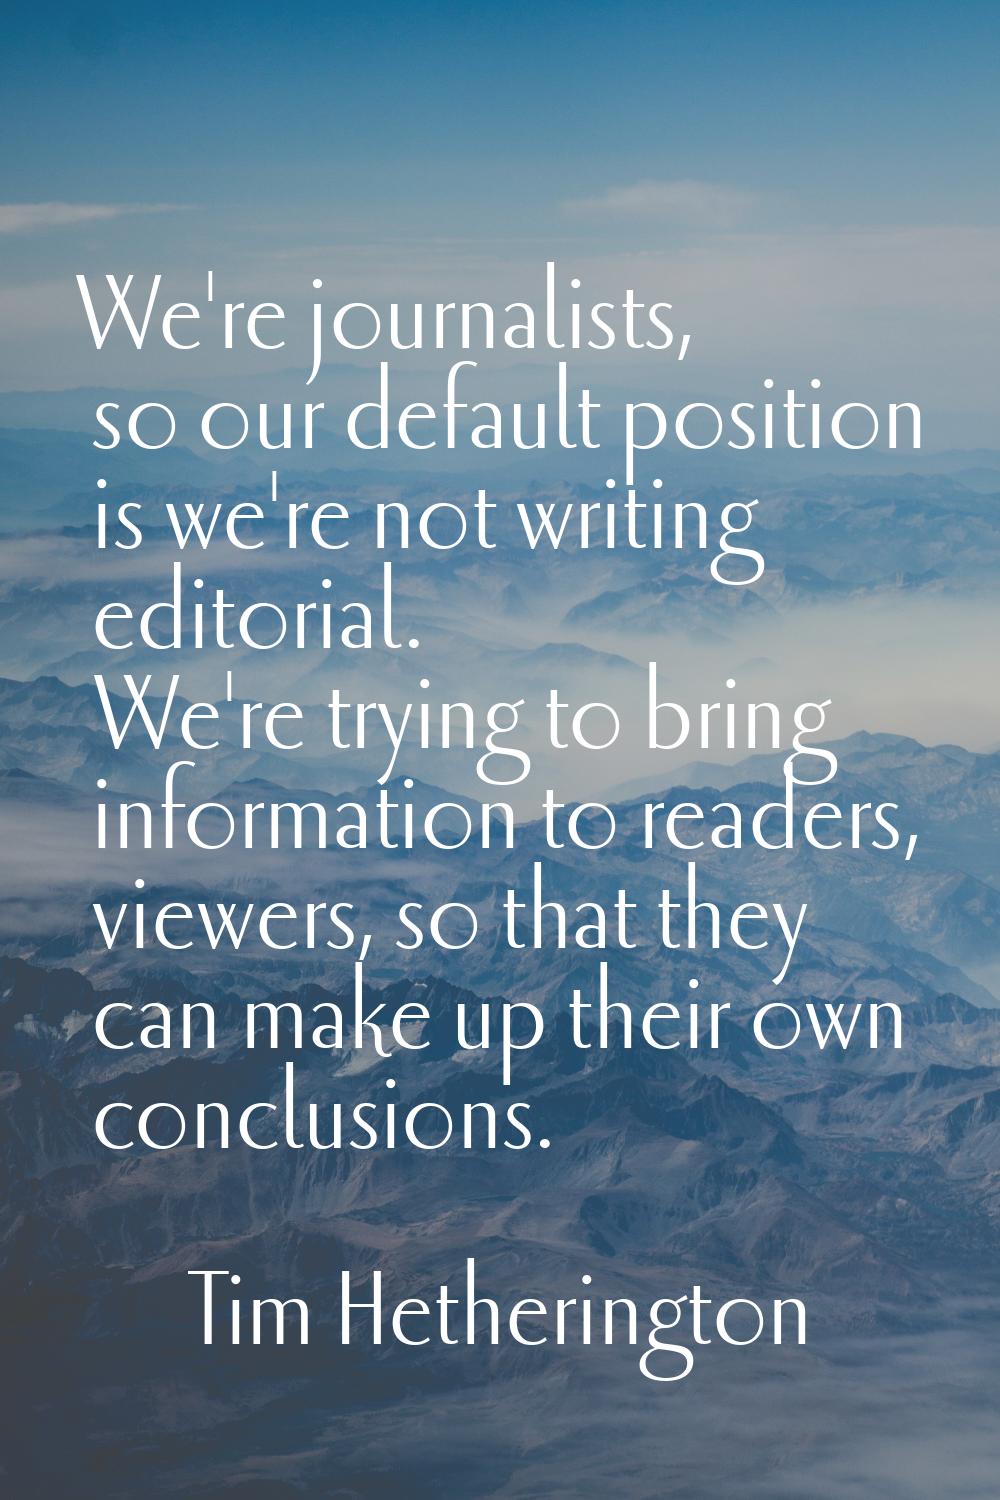 We're journalists, so our default position is we're not writing editorial. We're trying to bring in